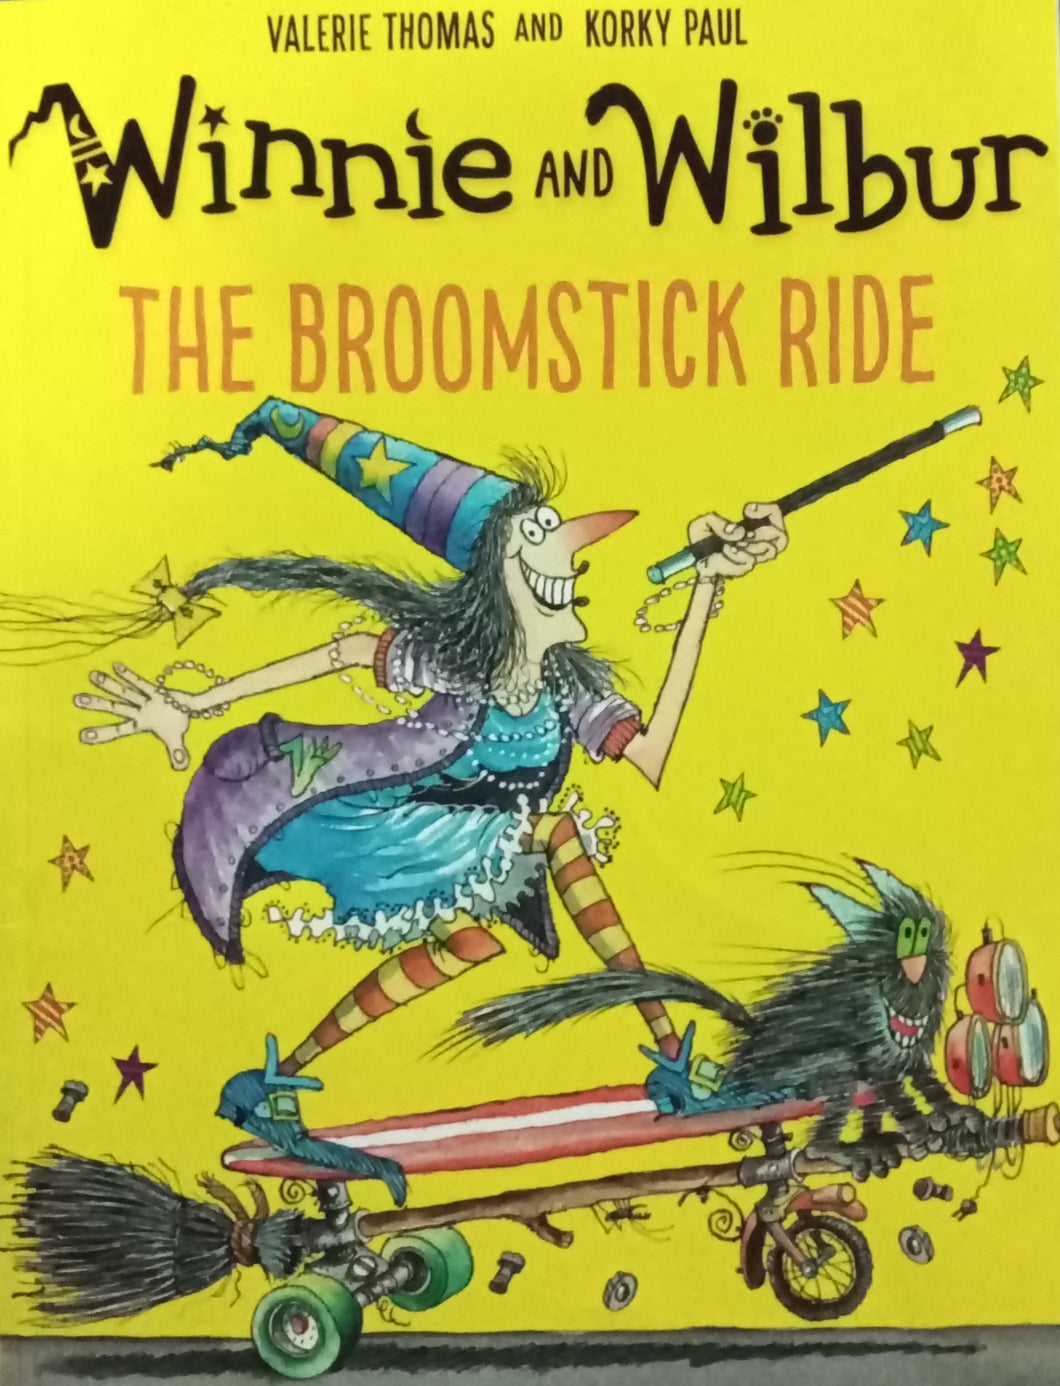 Winnie and Wilbur the Broomstick Ride by Valerie Thomas